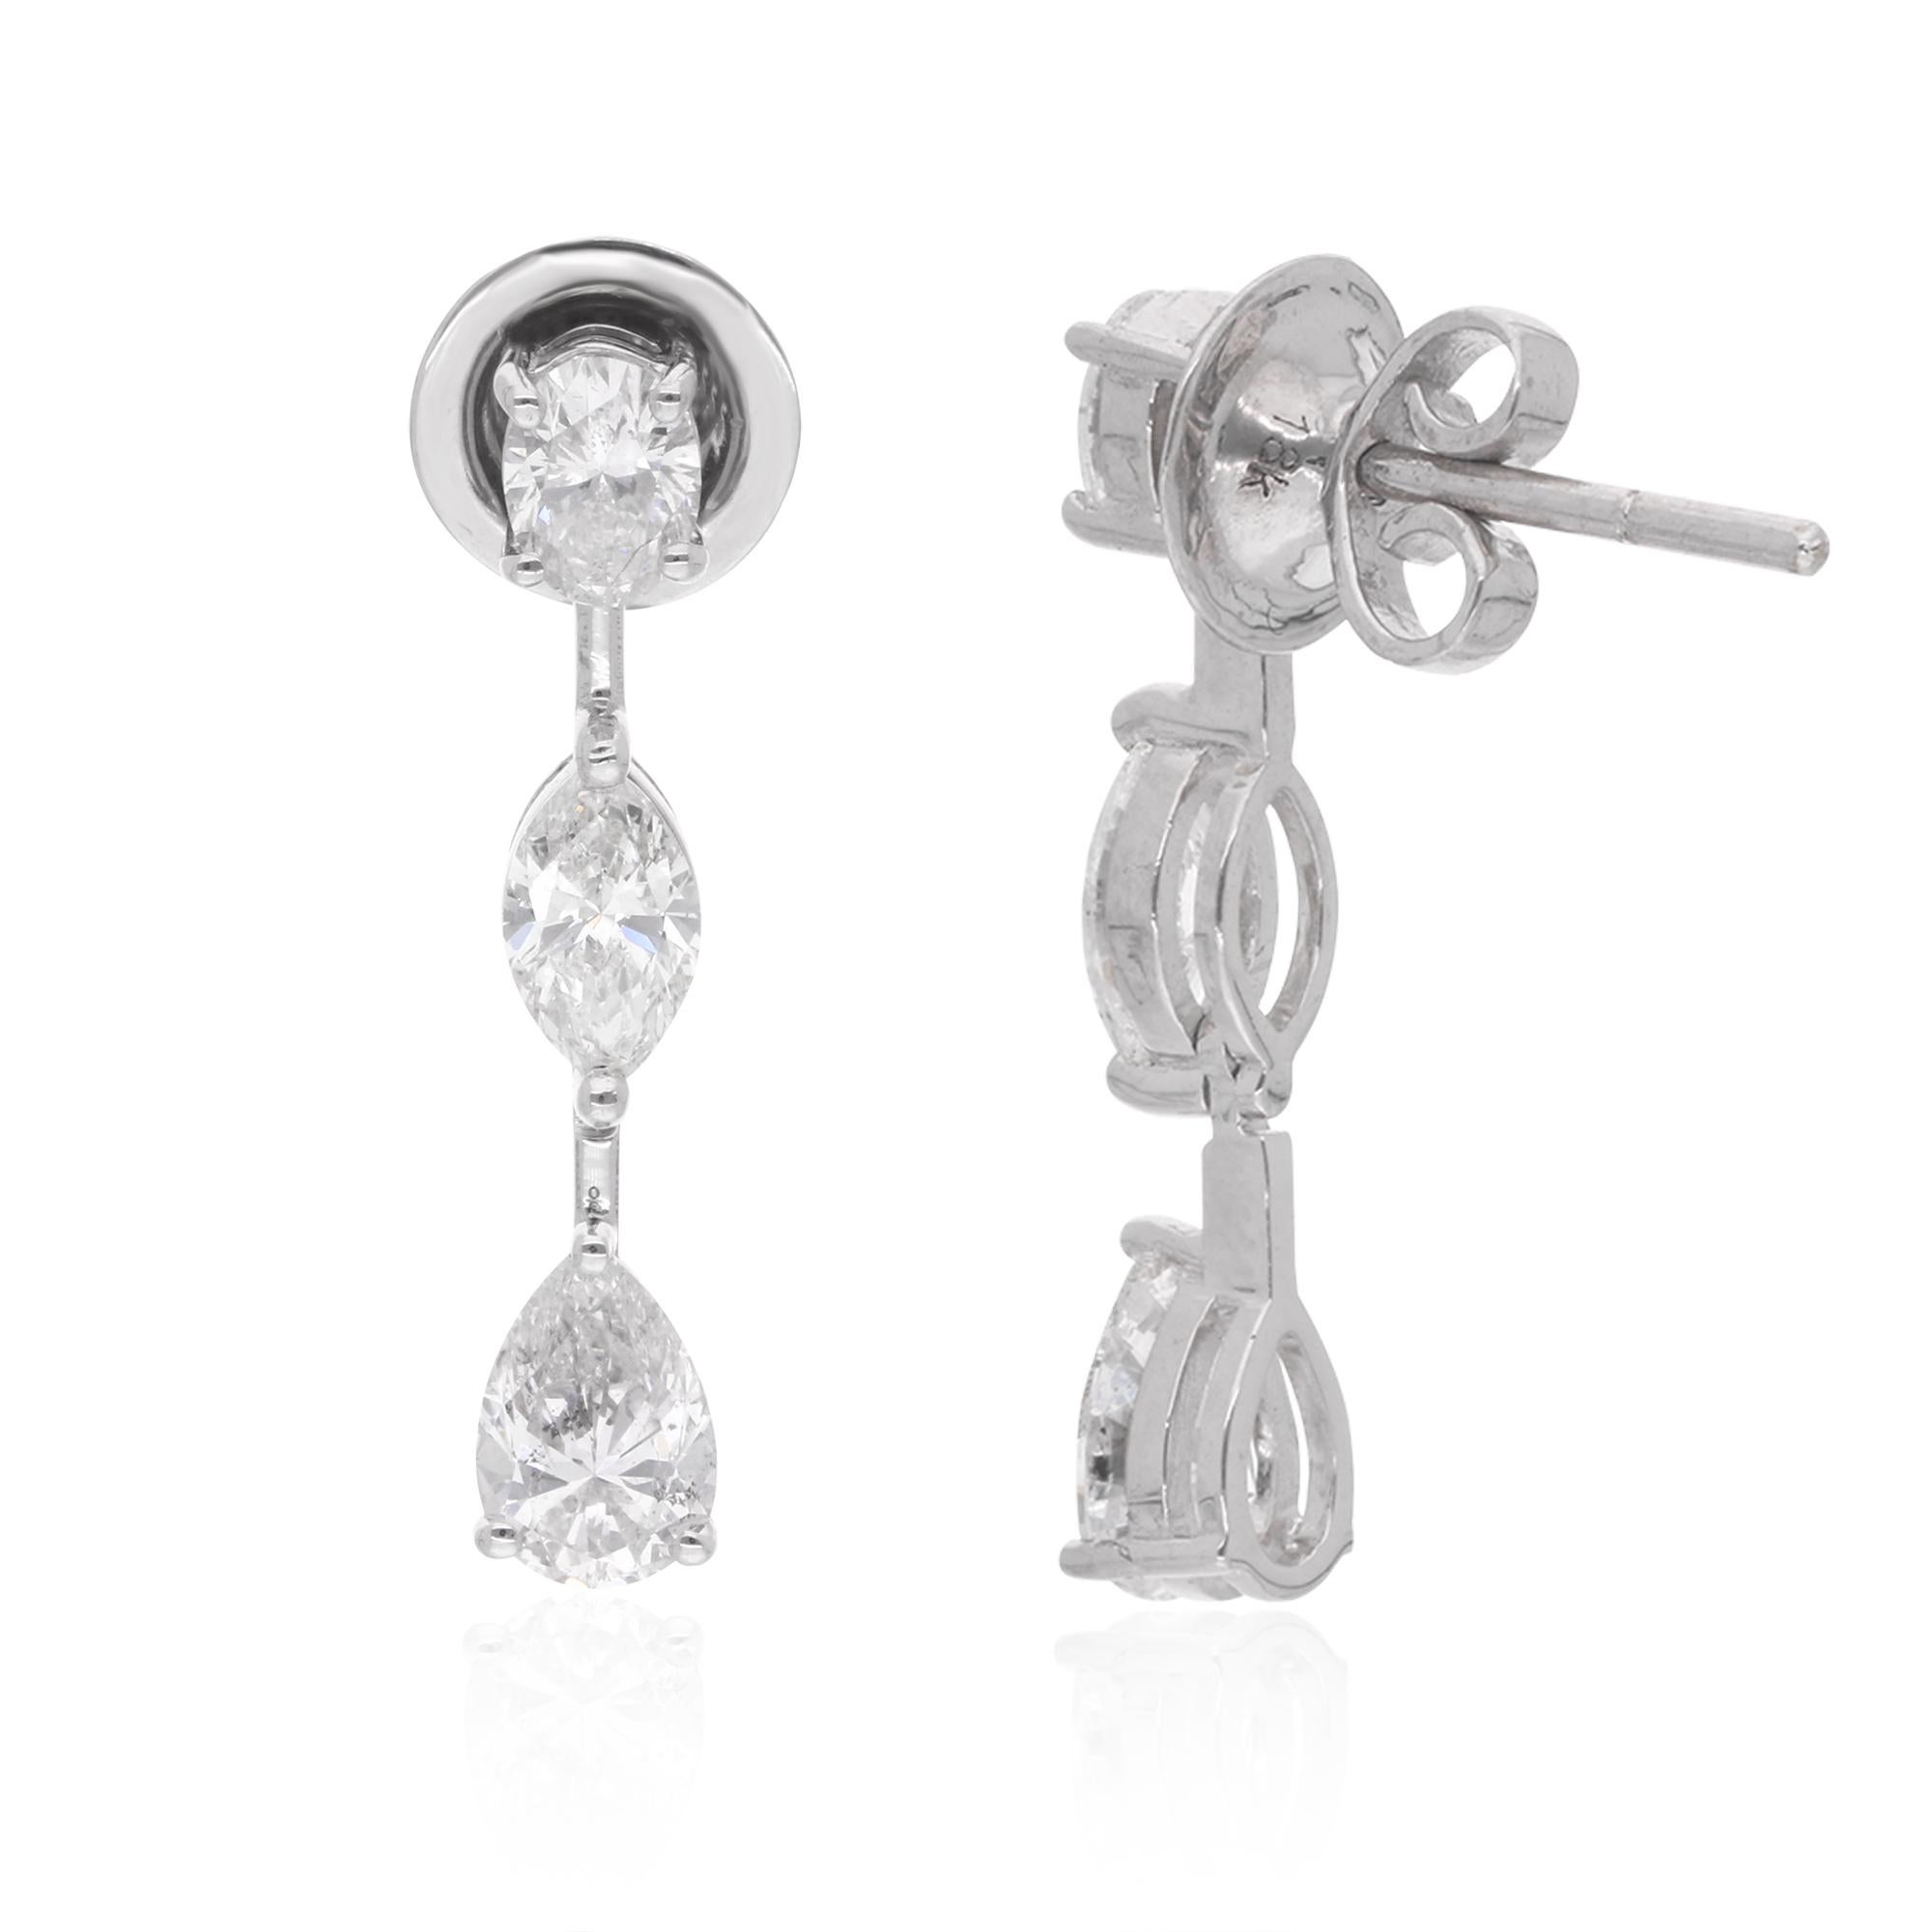 These exquisite earrings boast an impressive total weight of 2.16 carats, showcasing a stunning combination of oval, marquise, and pear-shaped diamonds. Crafted with meticulous attention to detail, they are set in luxurious 14 karat white gold,